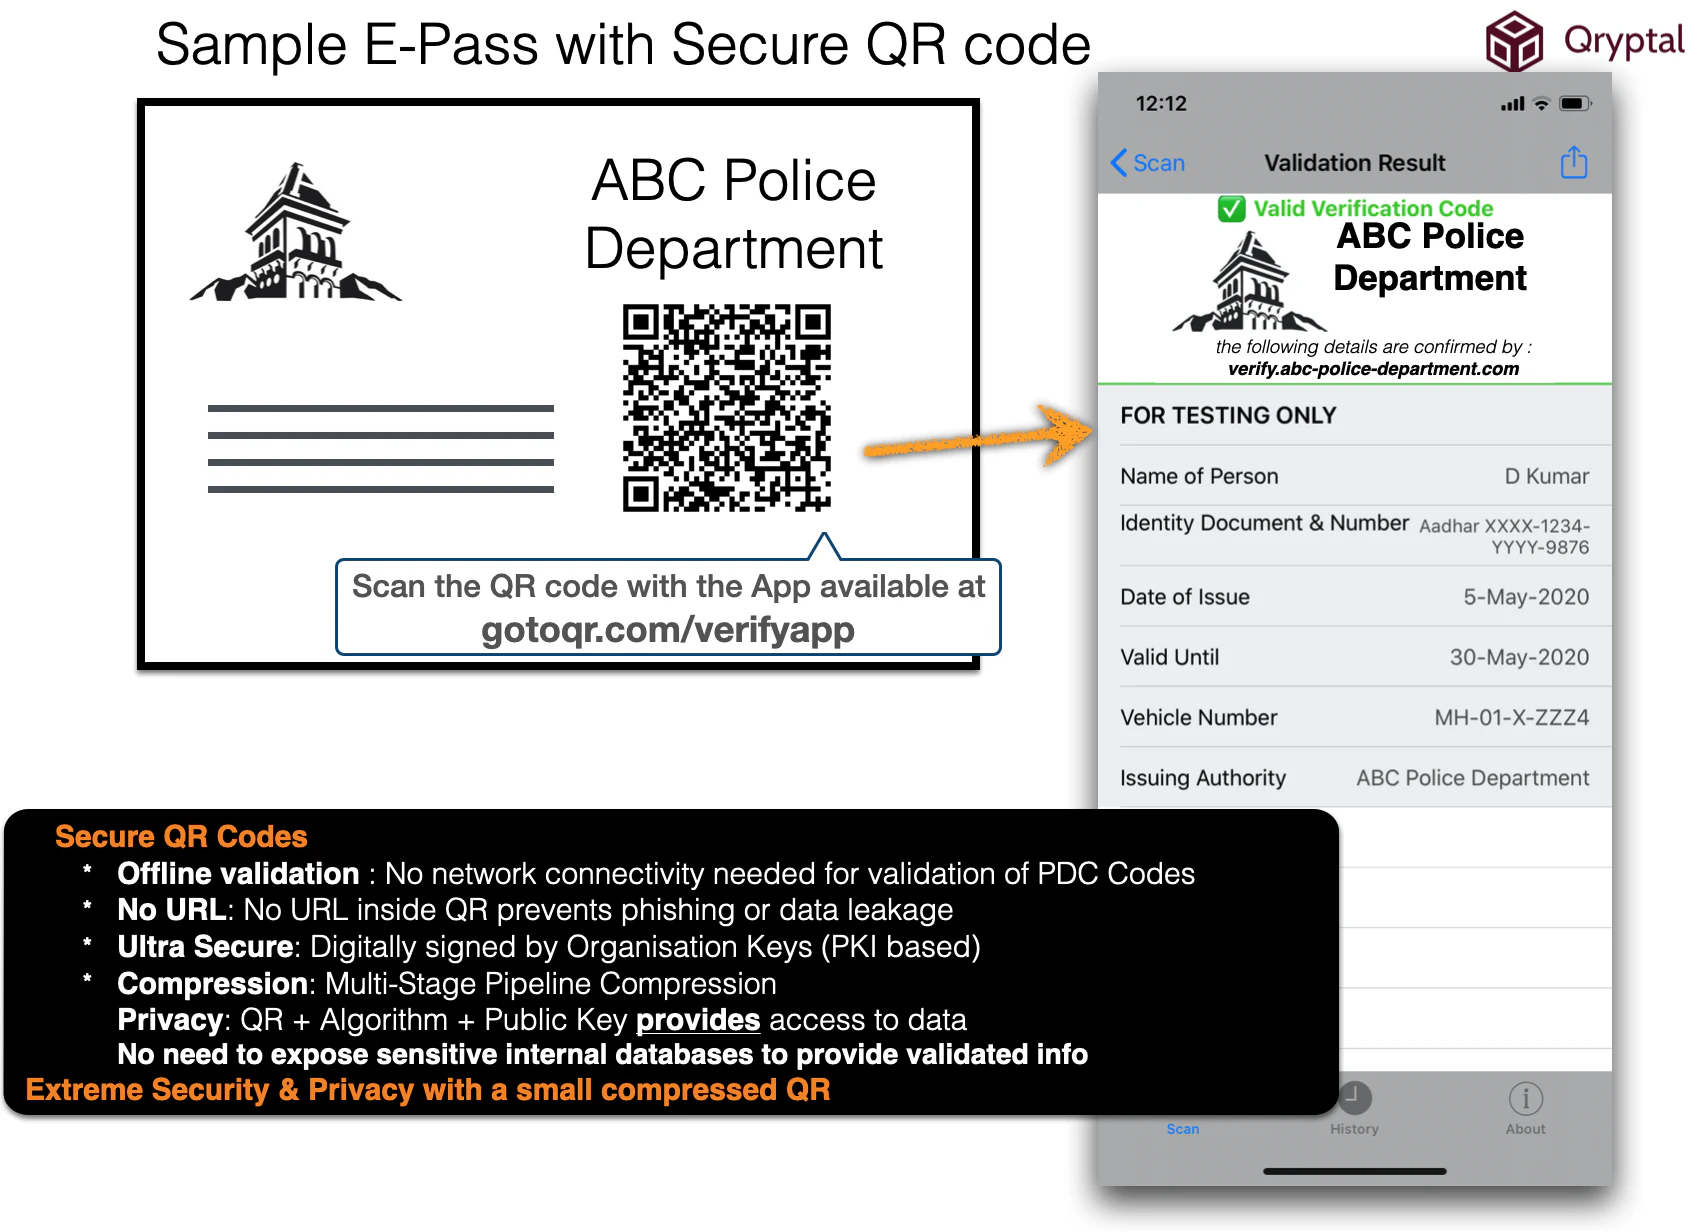 Secure QR code for travel passes